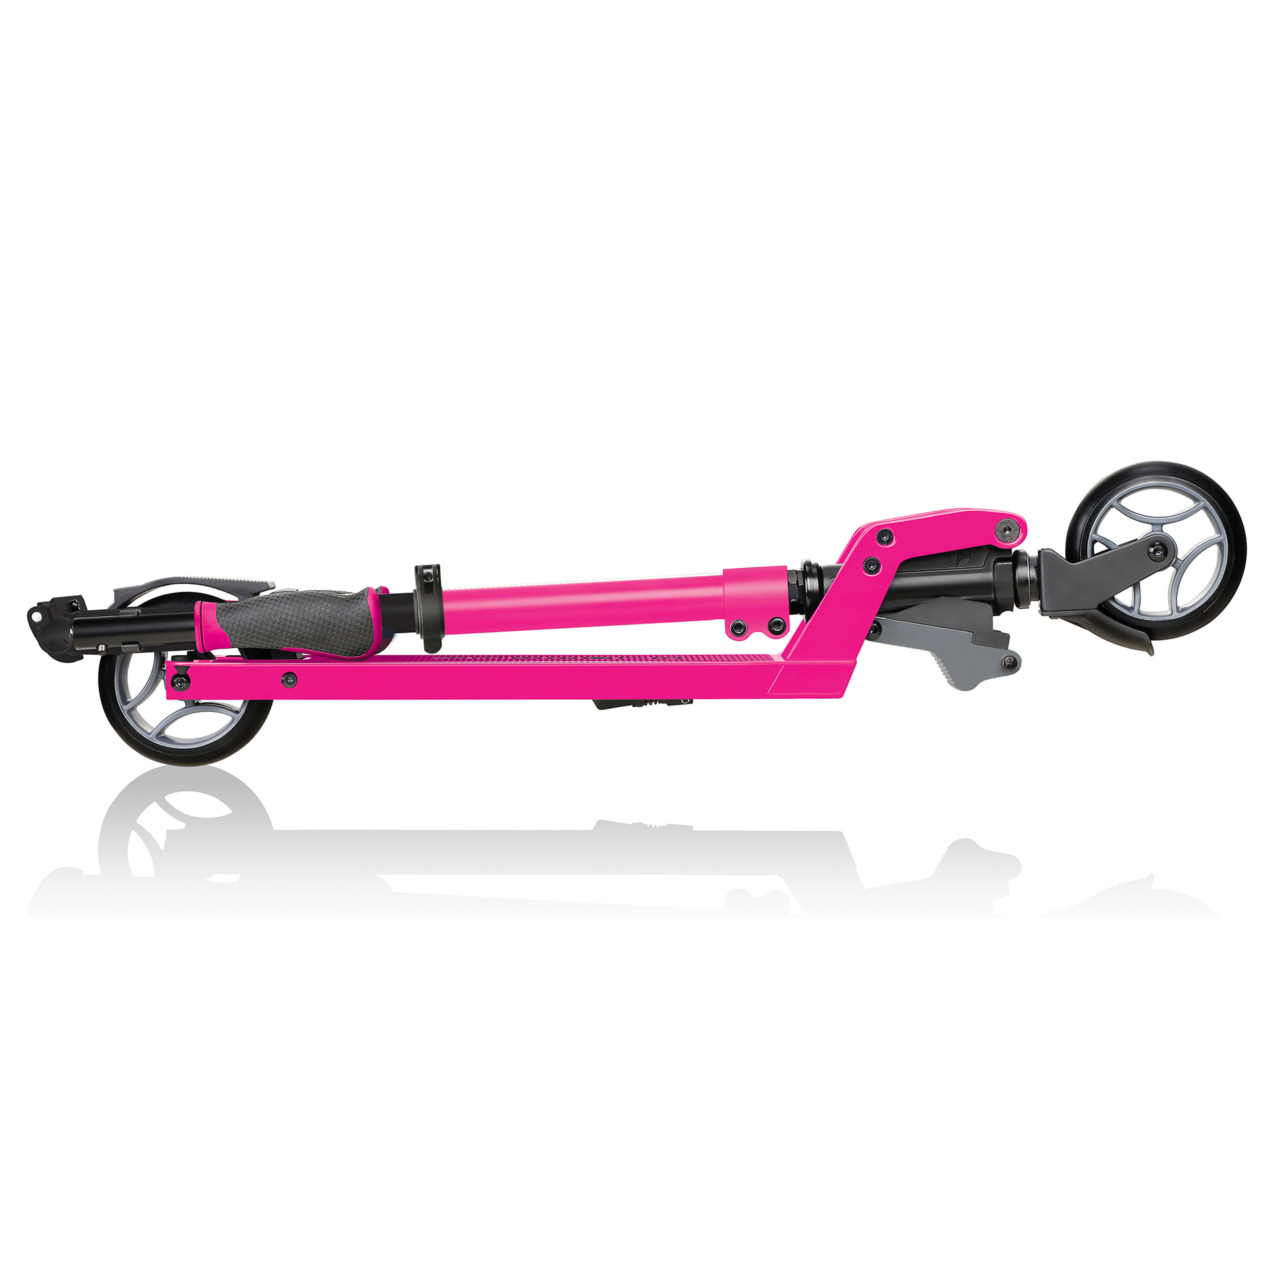 670 110 2 Fold Up Scooter